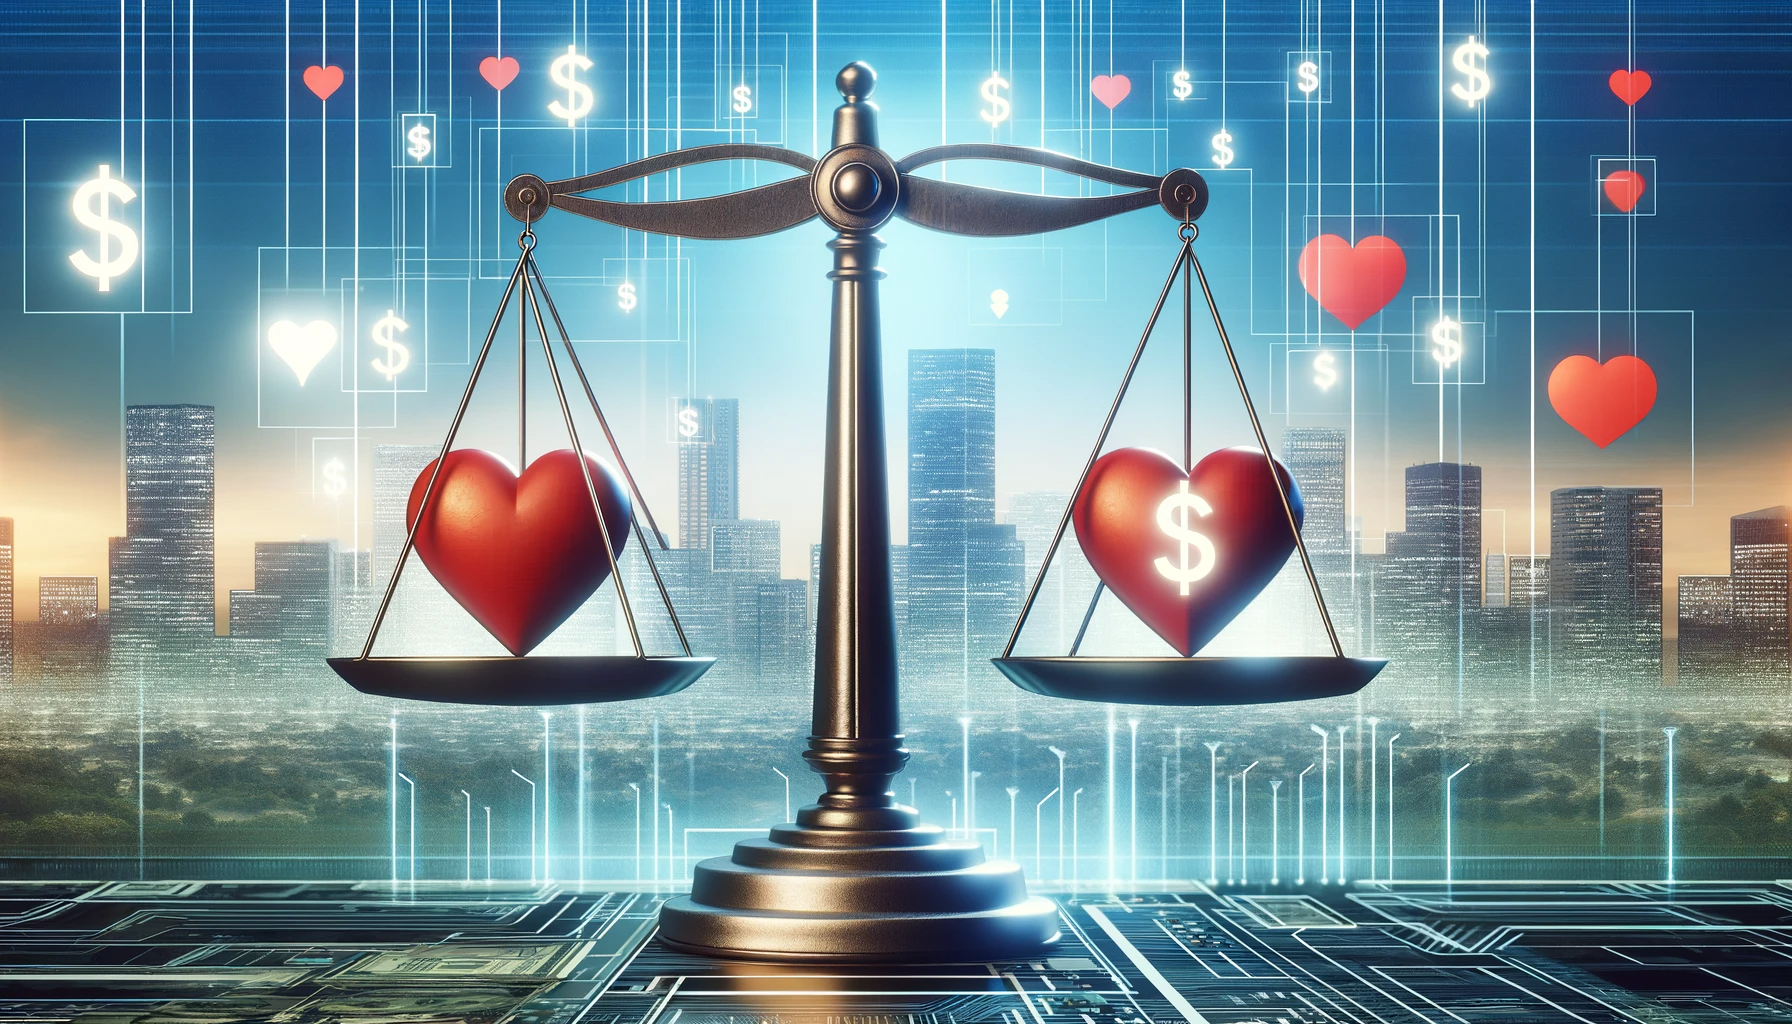 weighing risks of seeking.com - image is a trellis with one two hearts, one with money logo on it